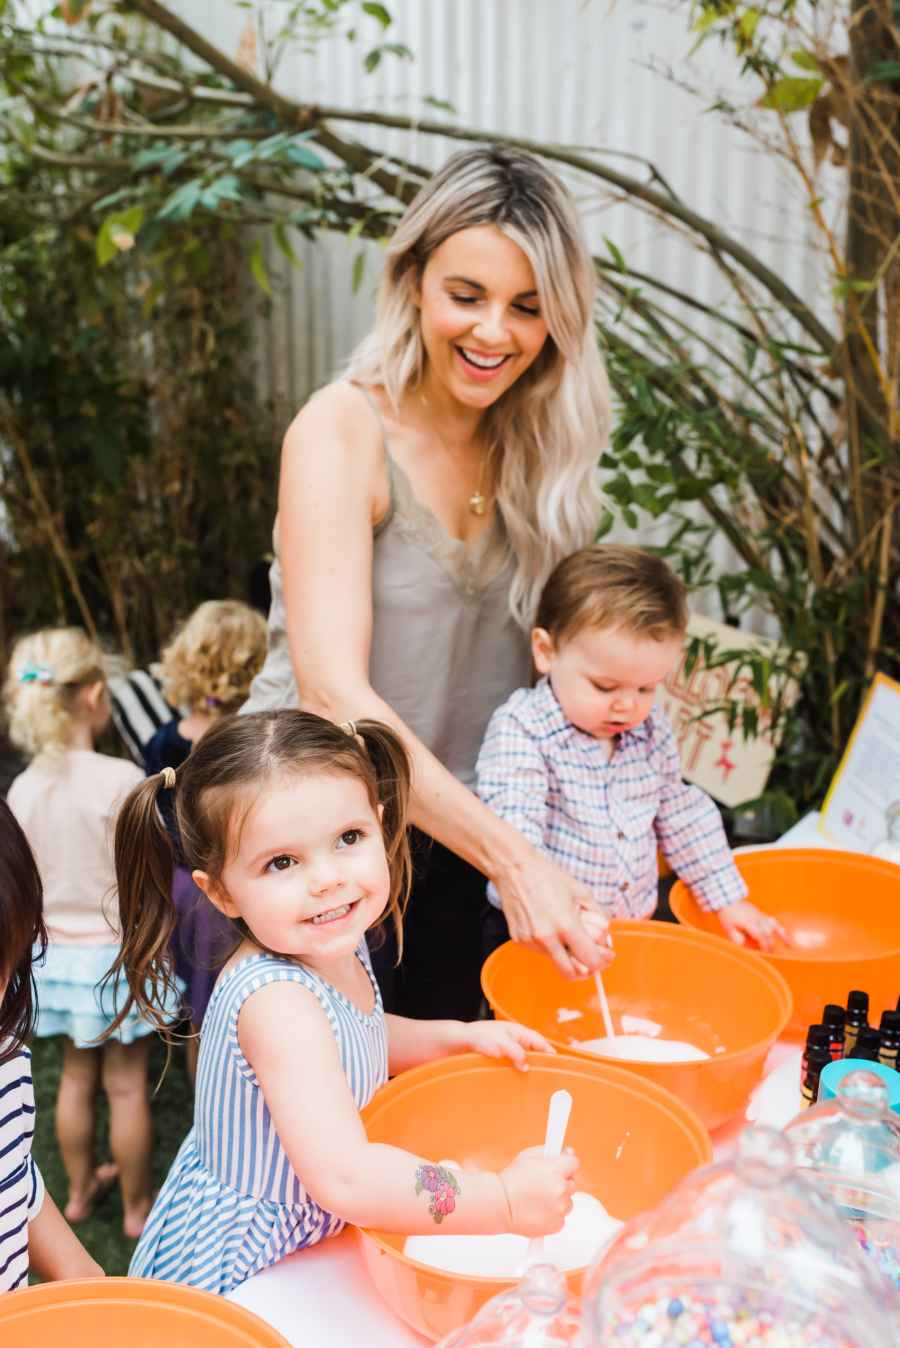 Ali Fedotowsky and kids